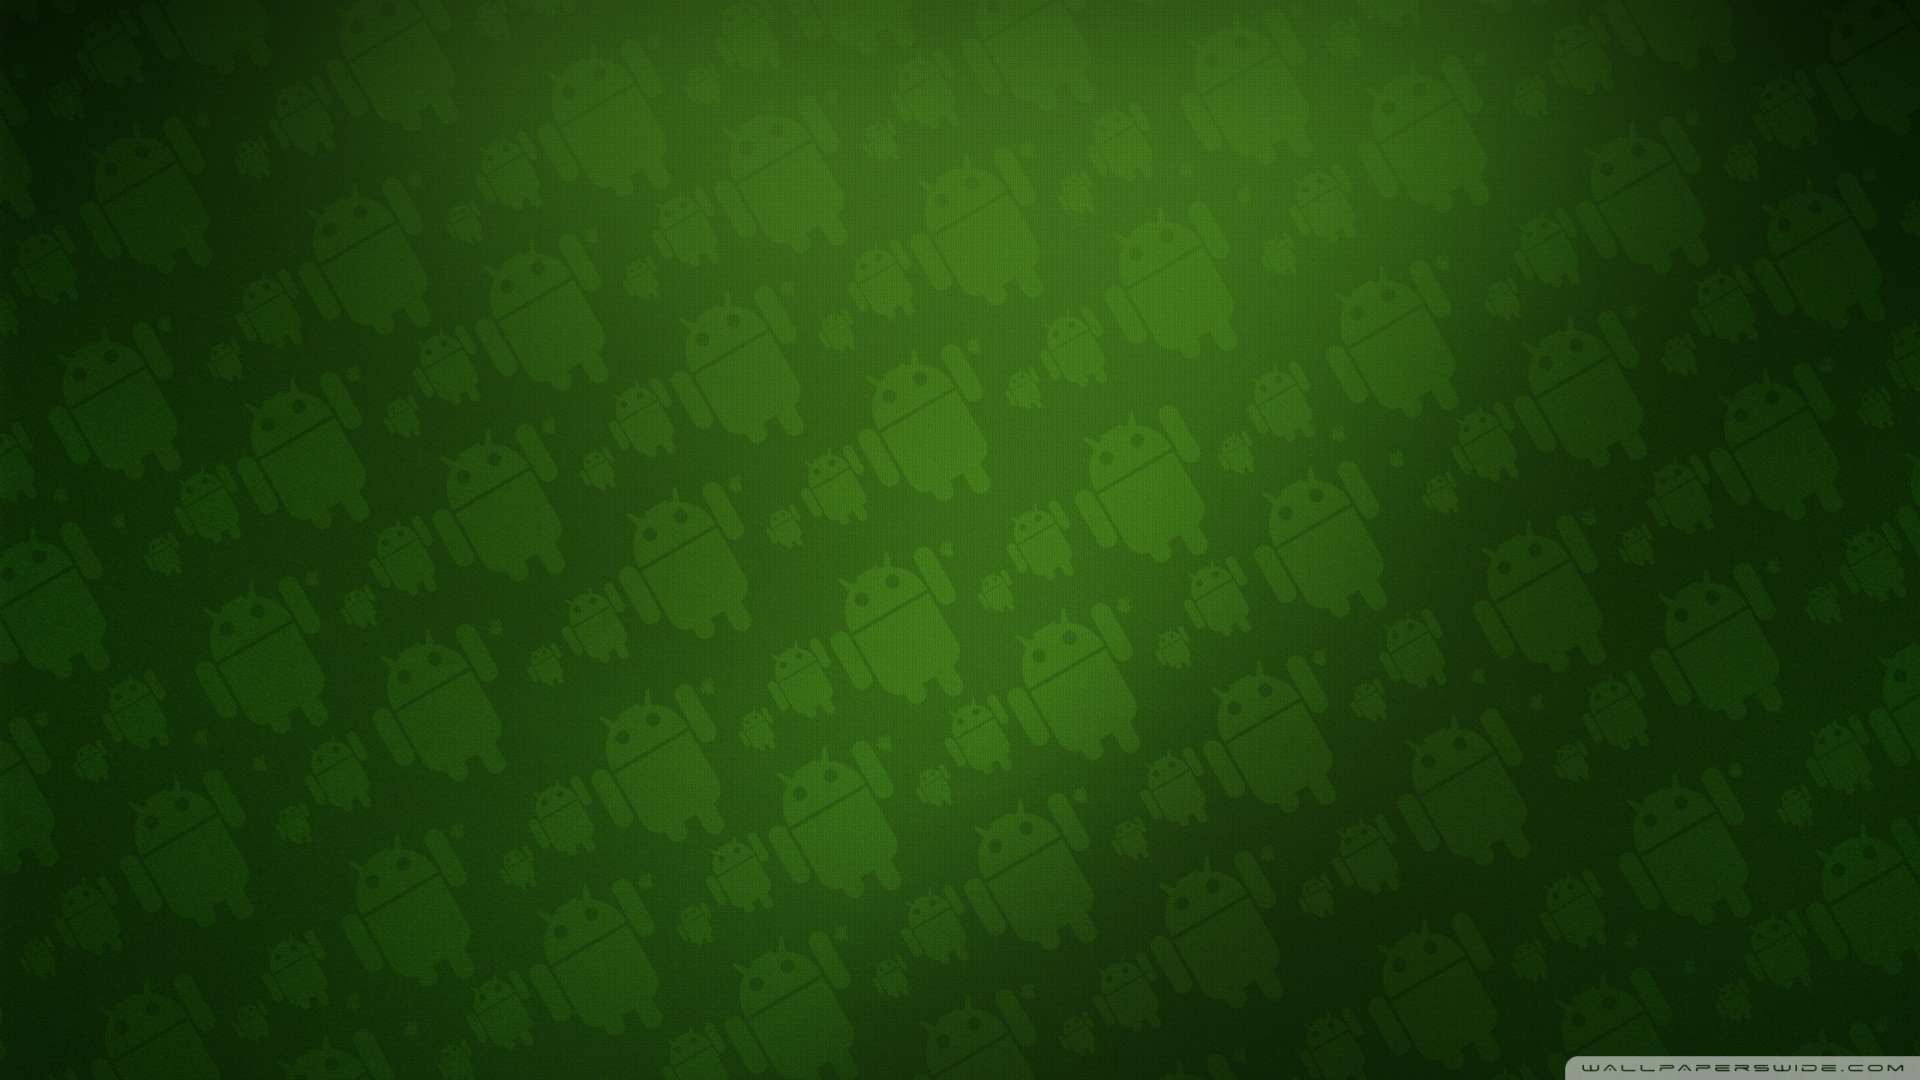 Wallpaper Android Green Background 1080p HD Upload At